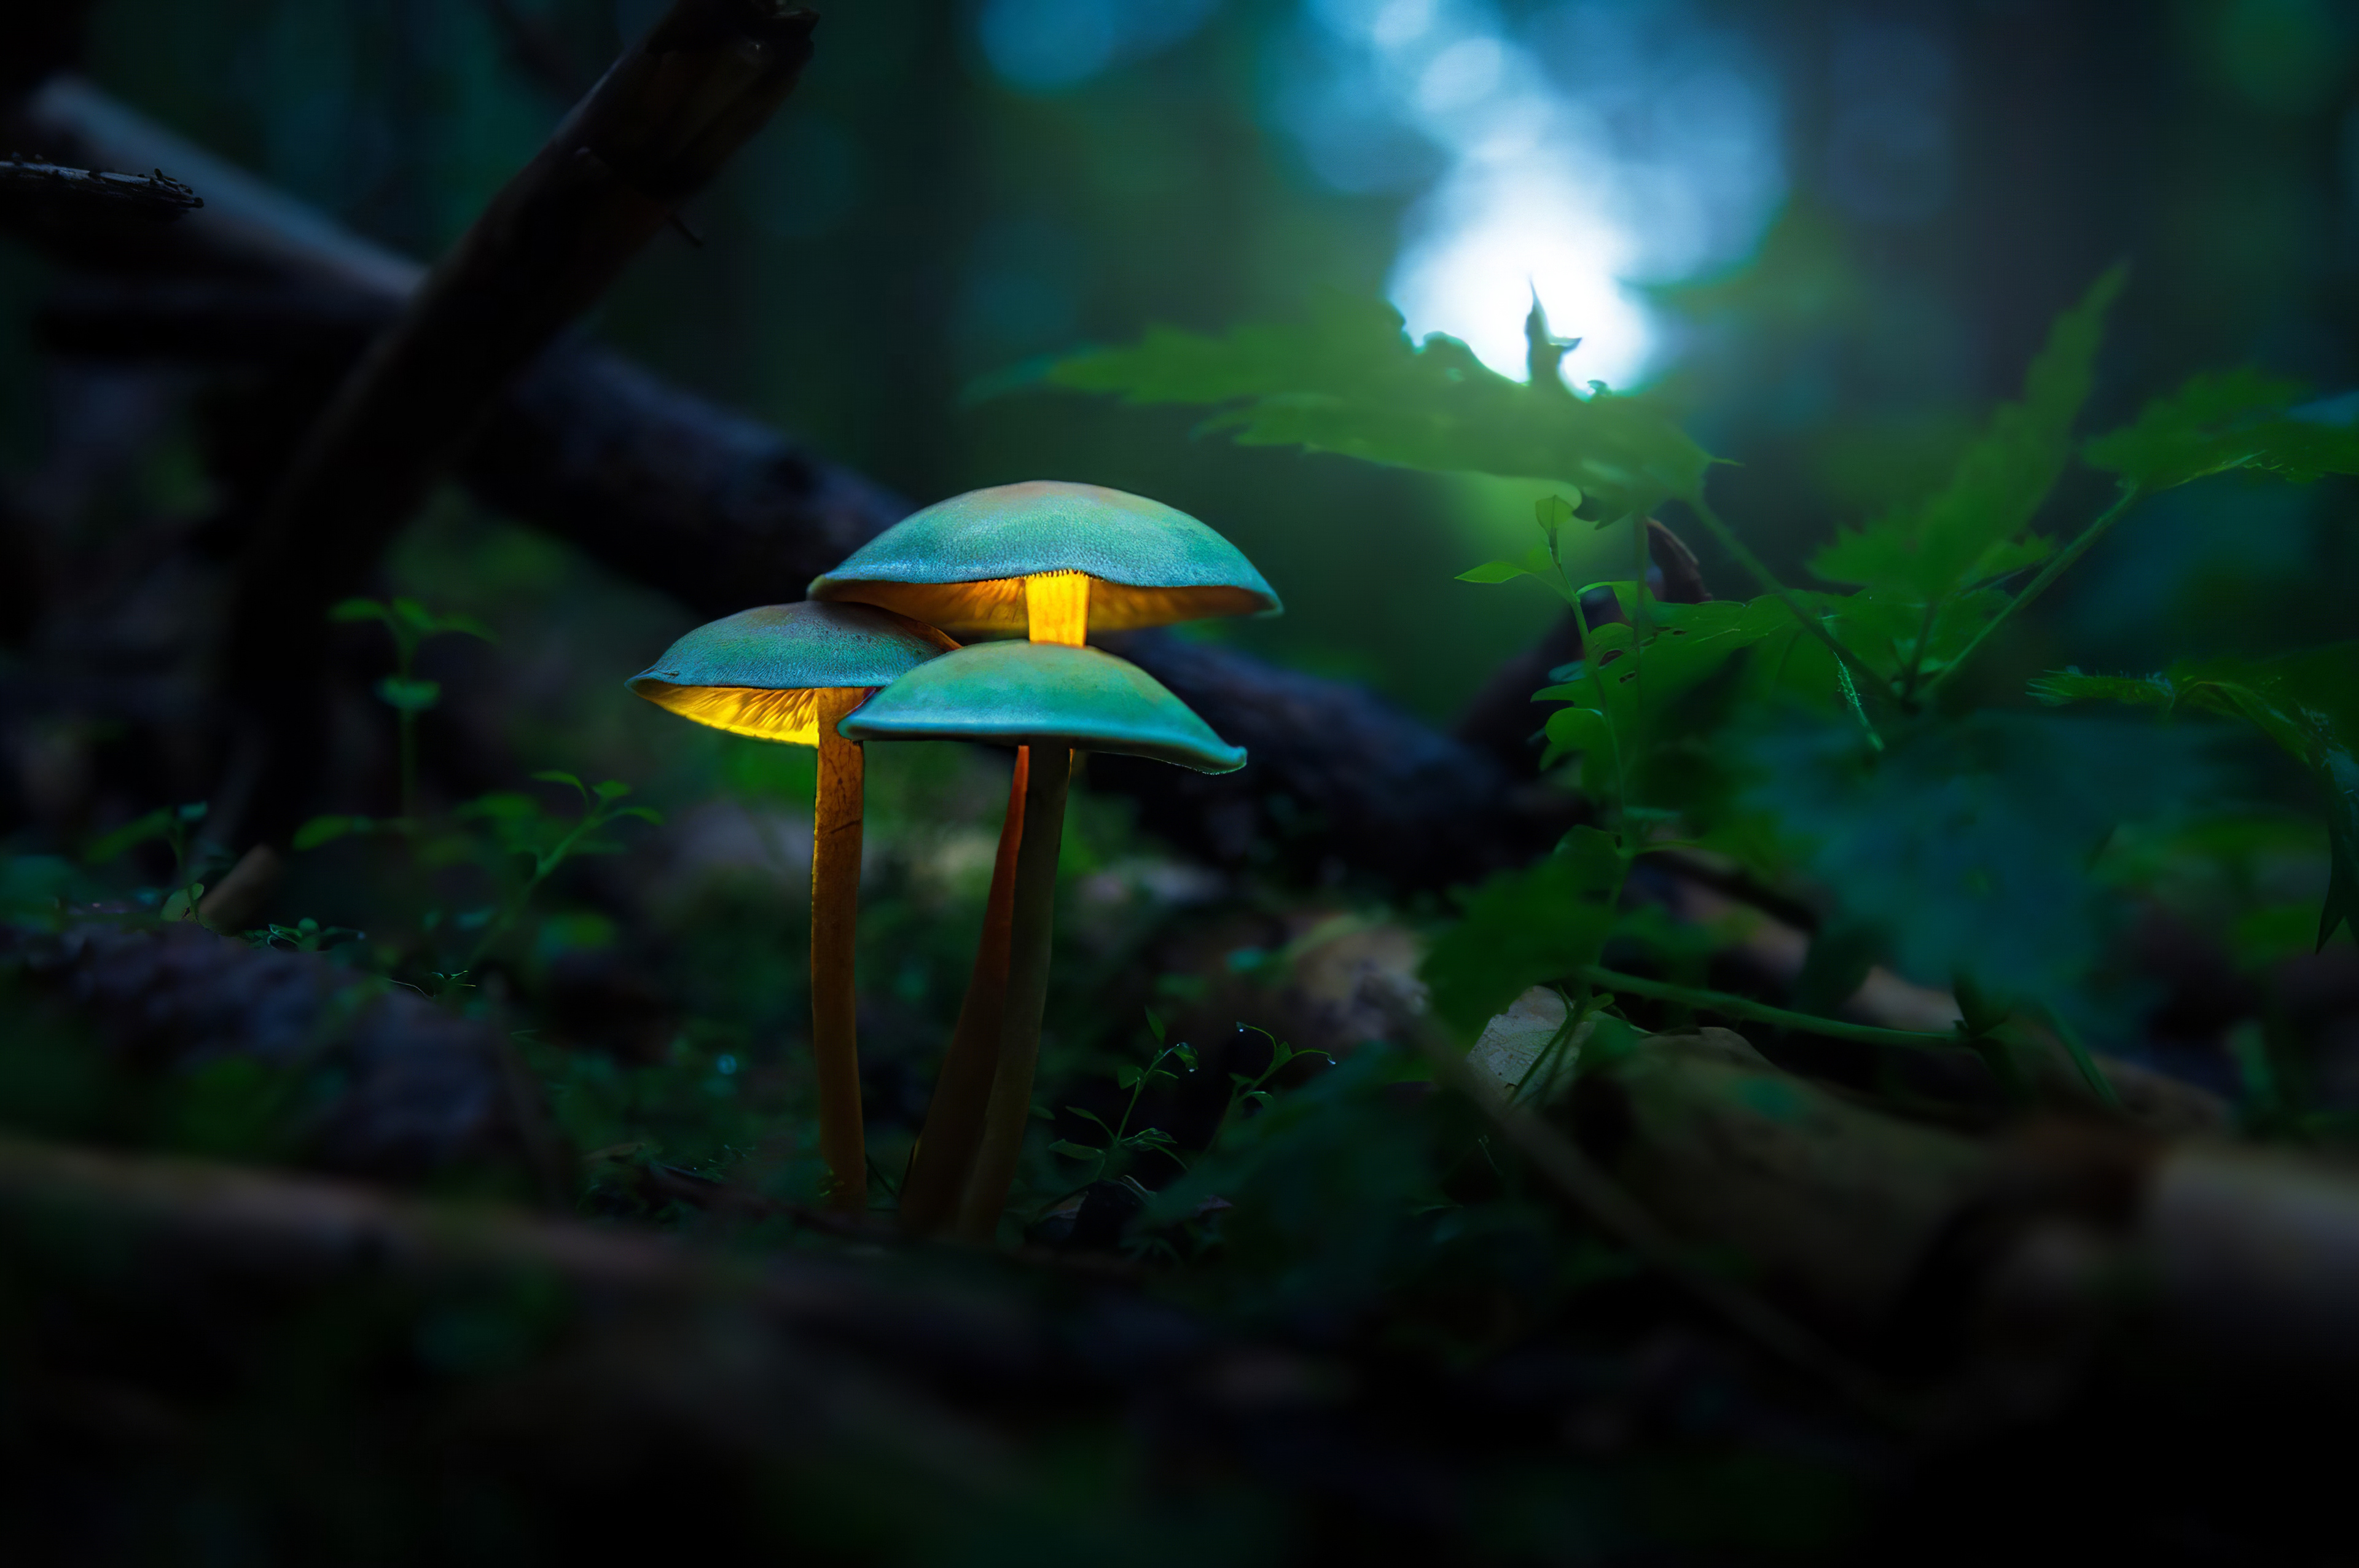 General 3840x2553 mushroom forest macro blurred depth of field glowing photography